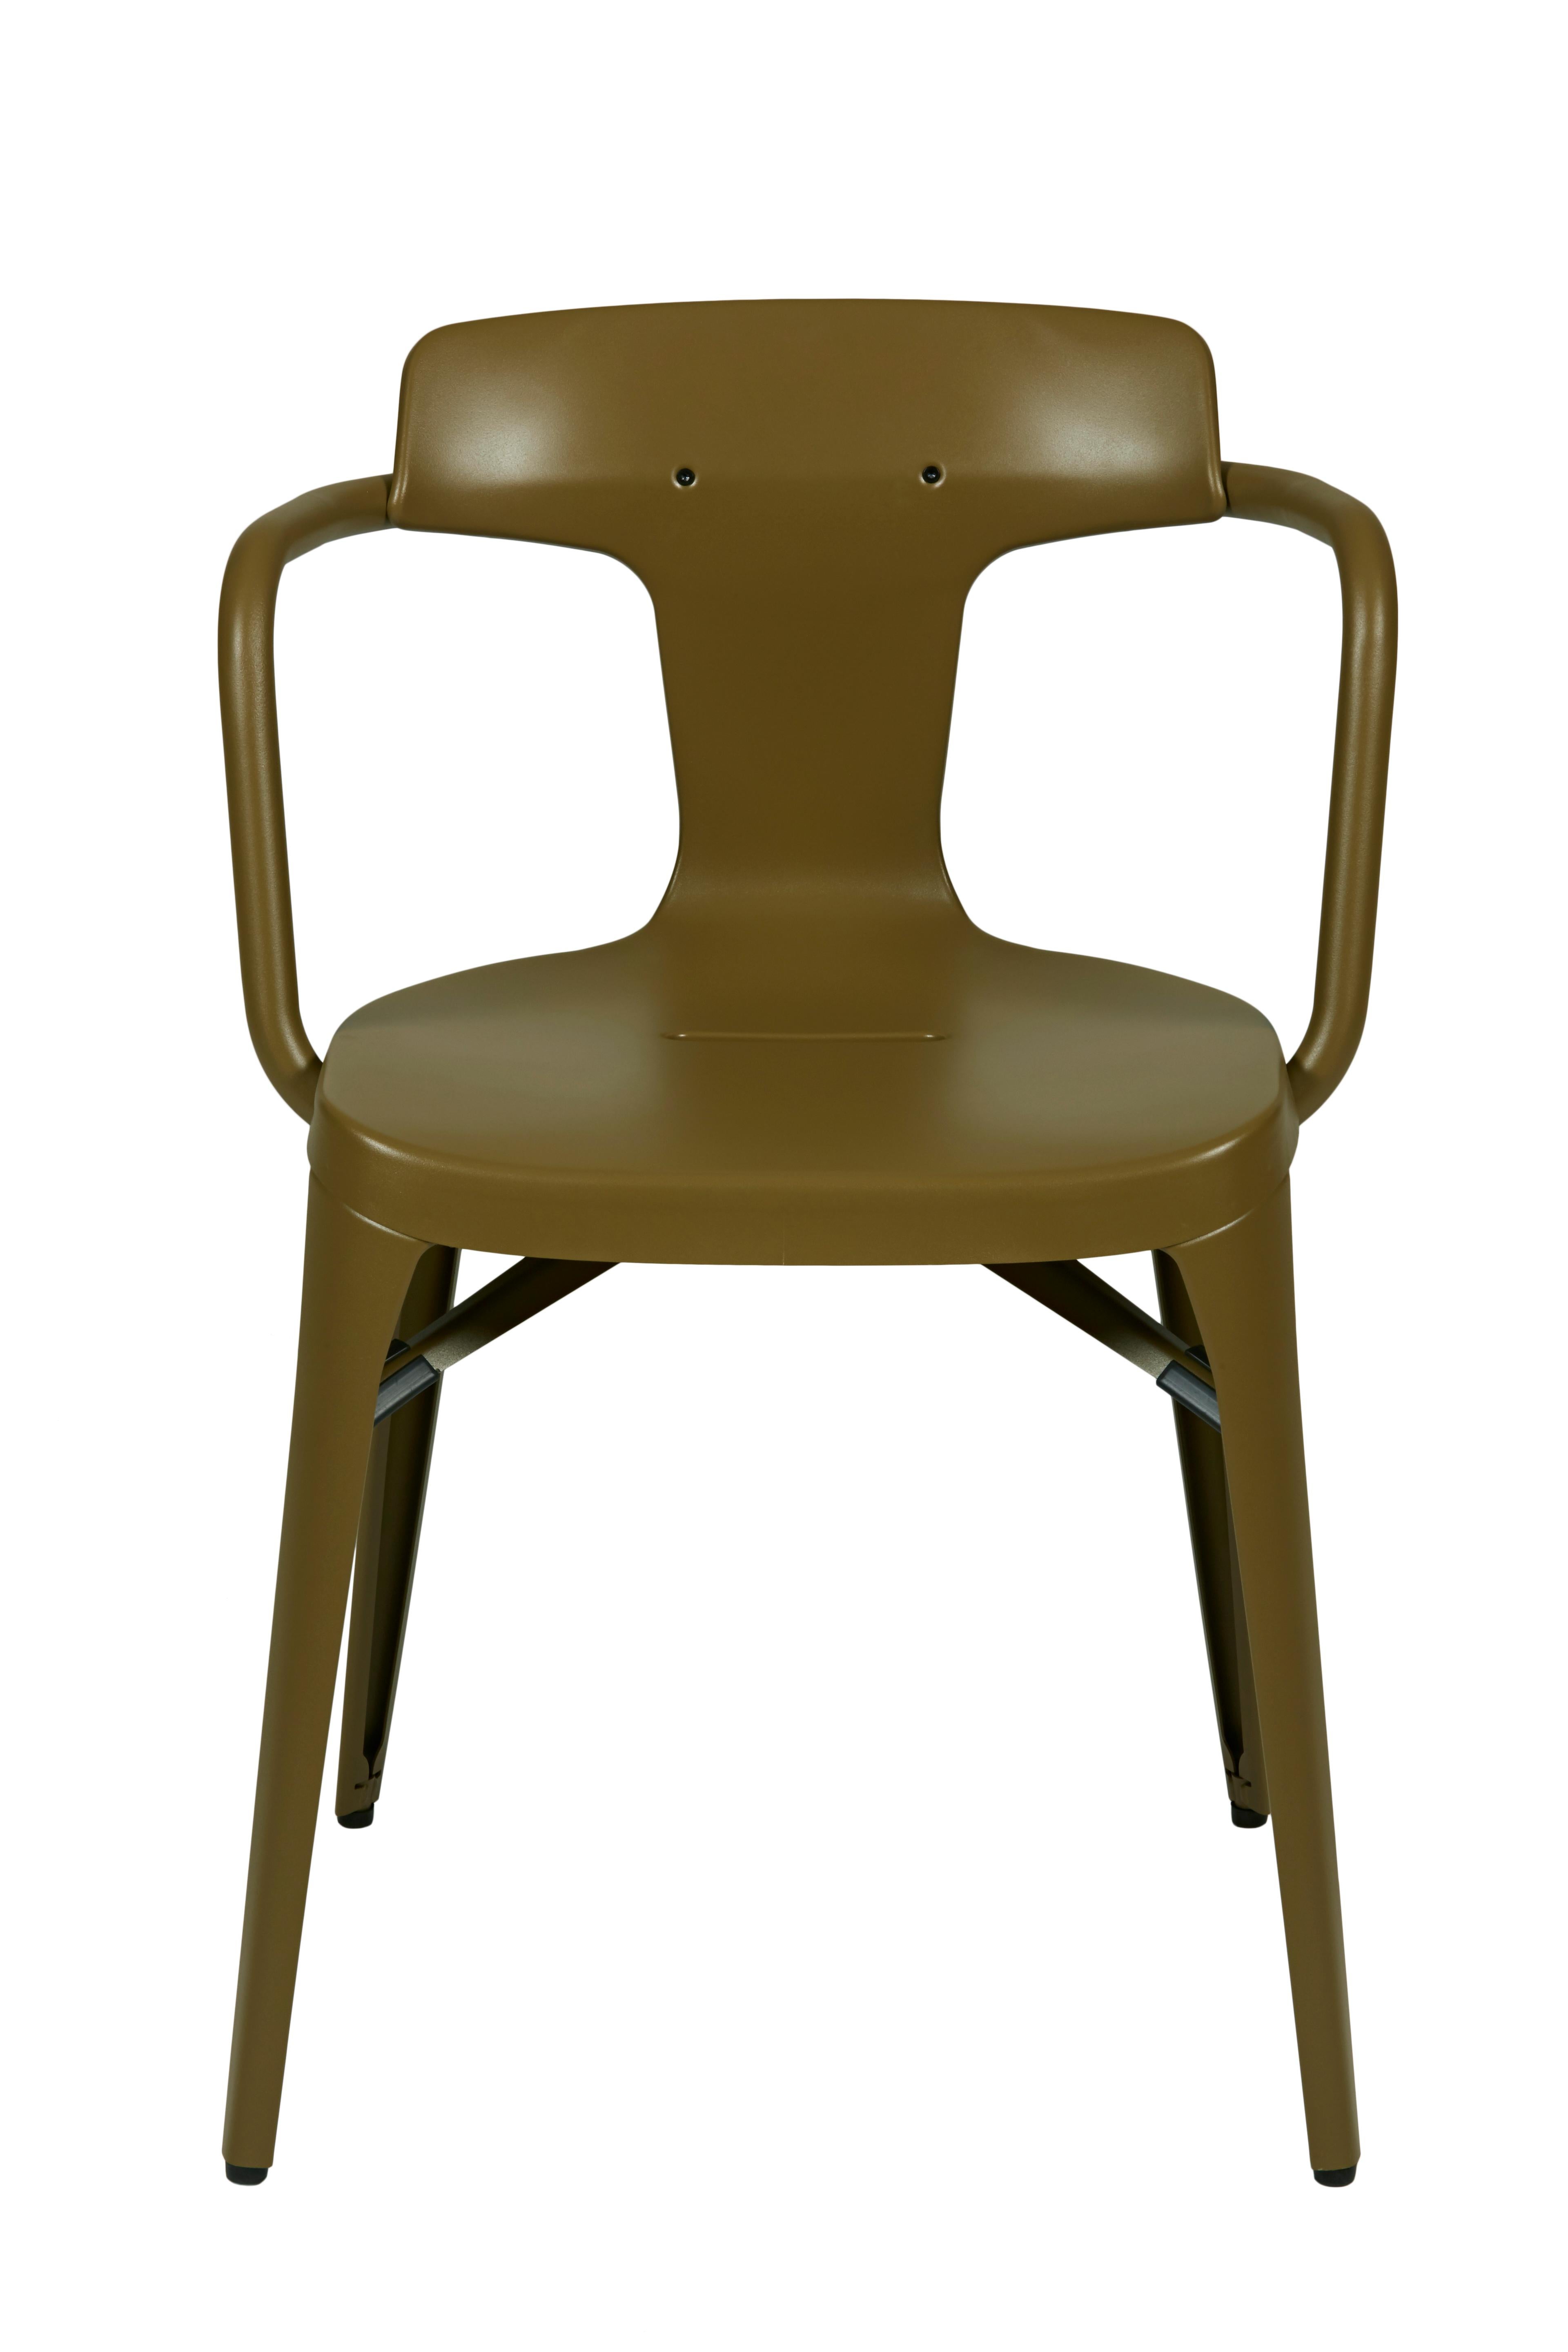 Im Angebot: T14 Chair in Pop Colors by Patrick Norguet and Tolix, Brown (Kaki)